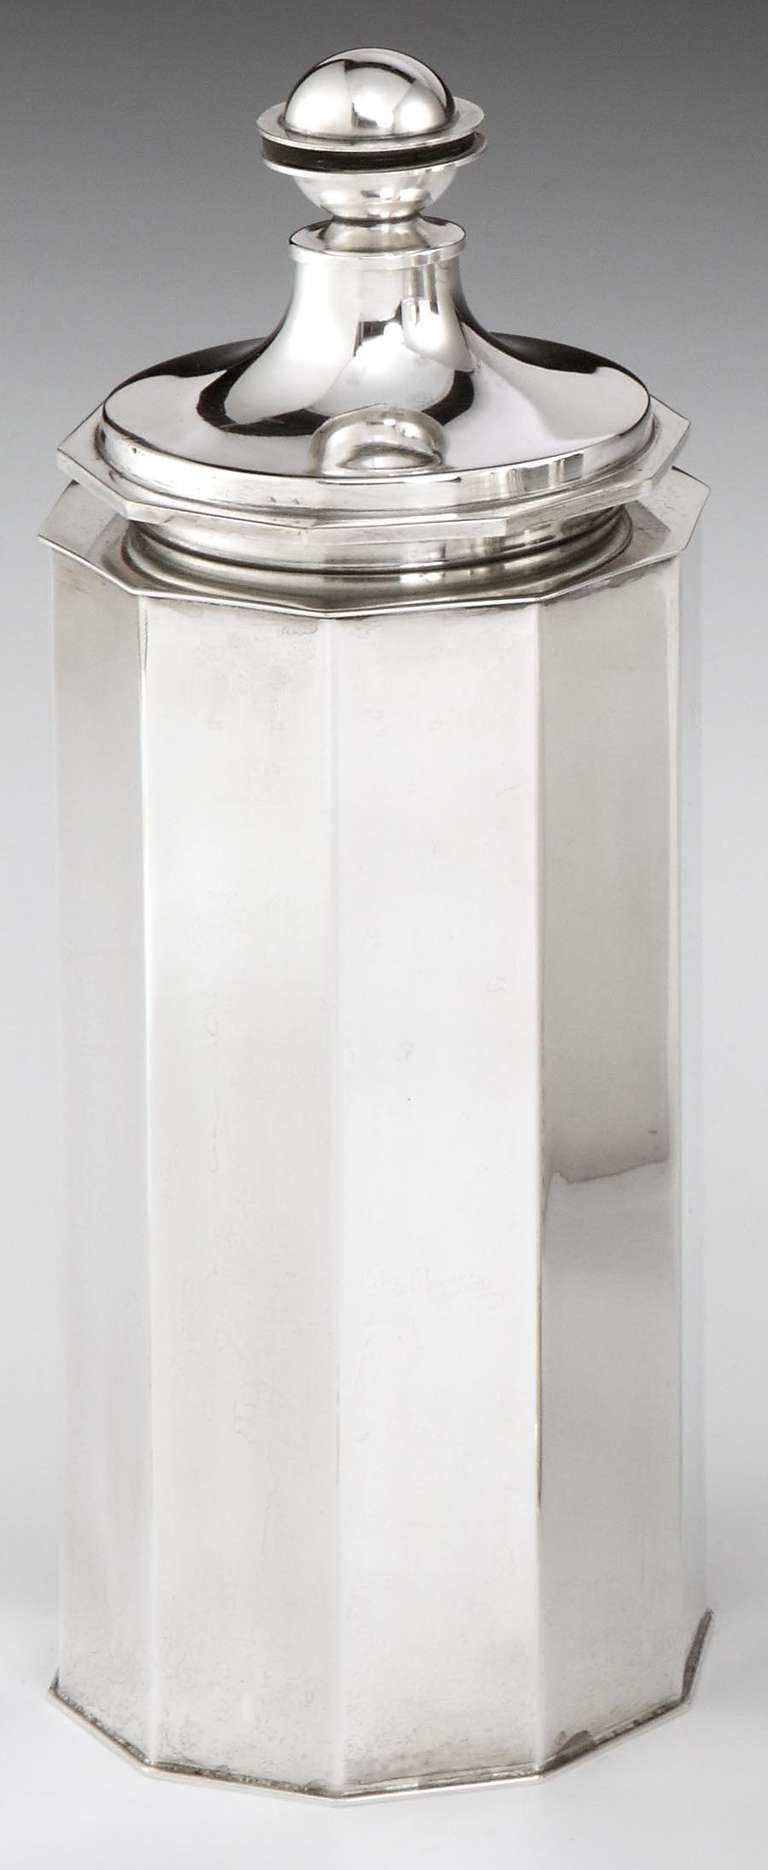 A very stylish, Art Deco Modernist form silver-plated cocktail shaker by the Carl M. Cohr Silver Company, Denmark. The shaker has a faceted body and bayonet-style fitting cap with integral strainer, and cork-stopper finial with black Bakelite